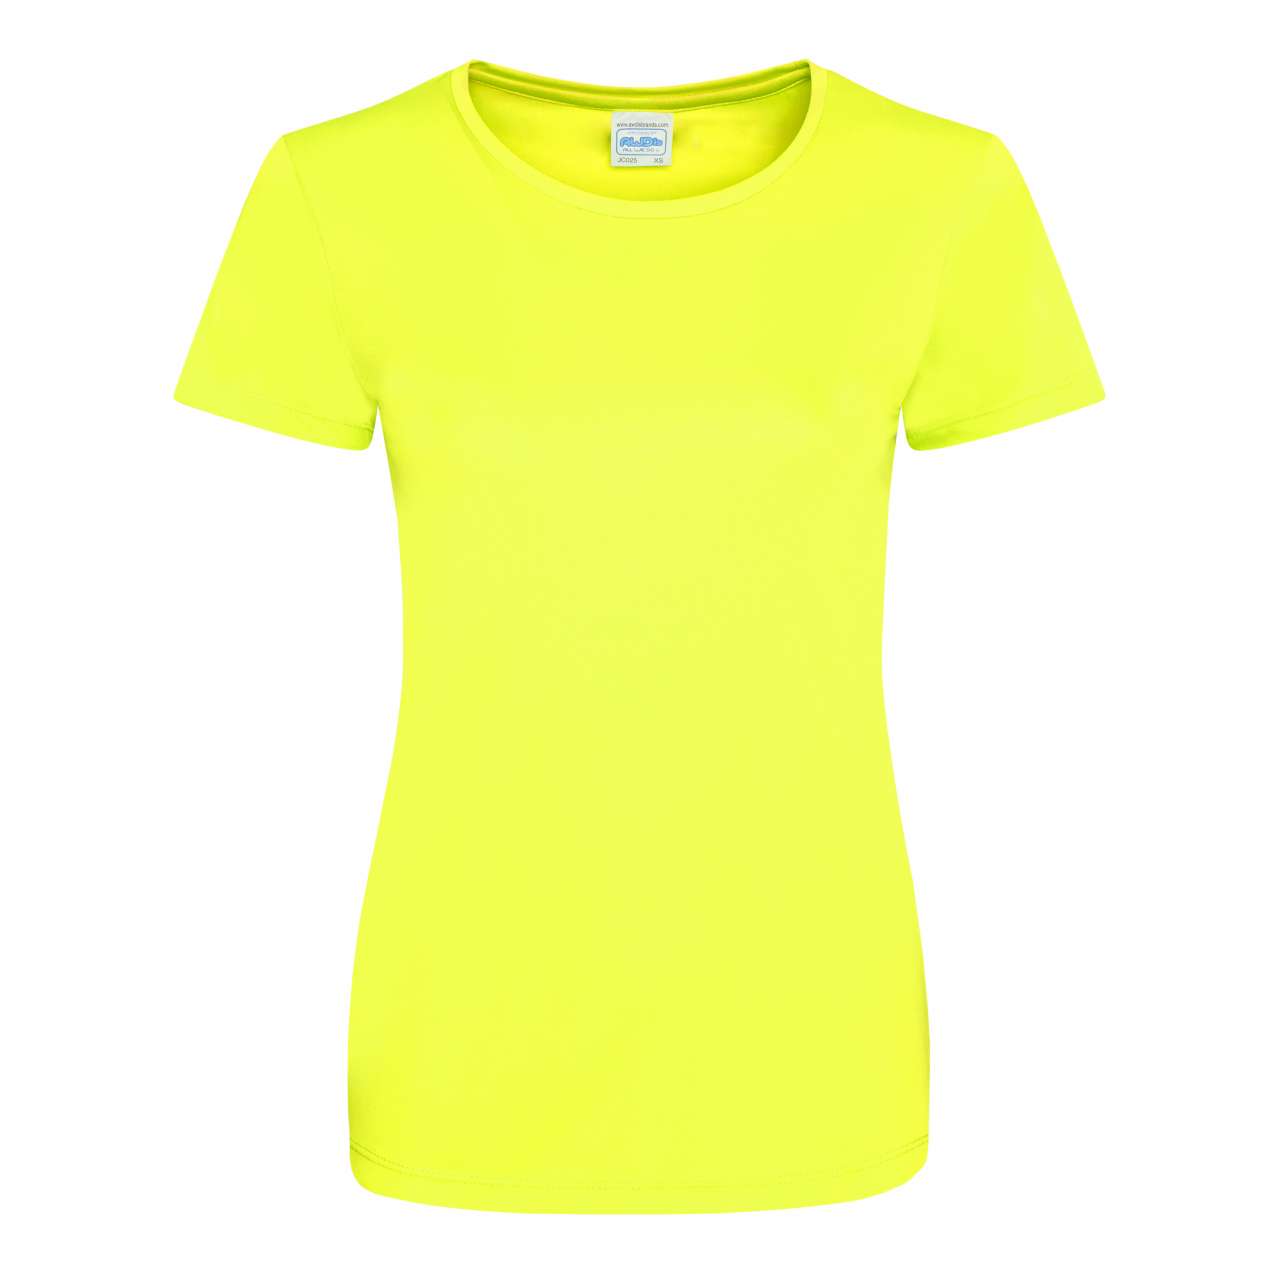 Promo  WOMEN'S COOL SMOOTH T